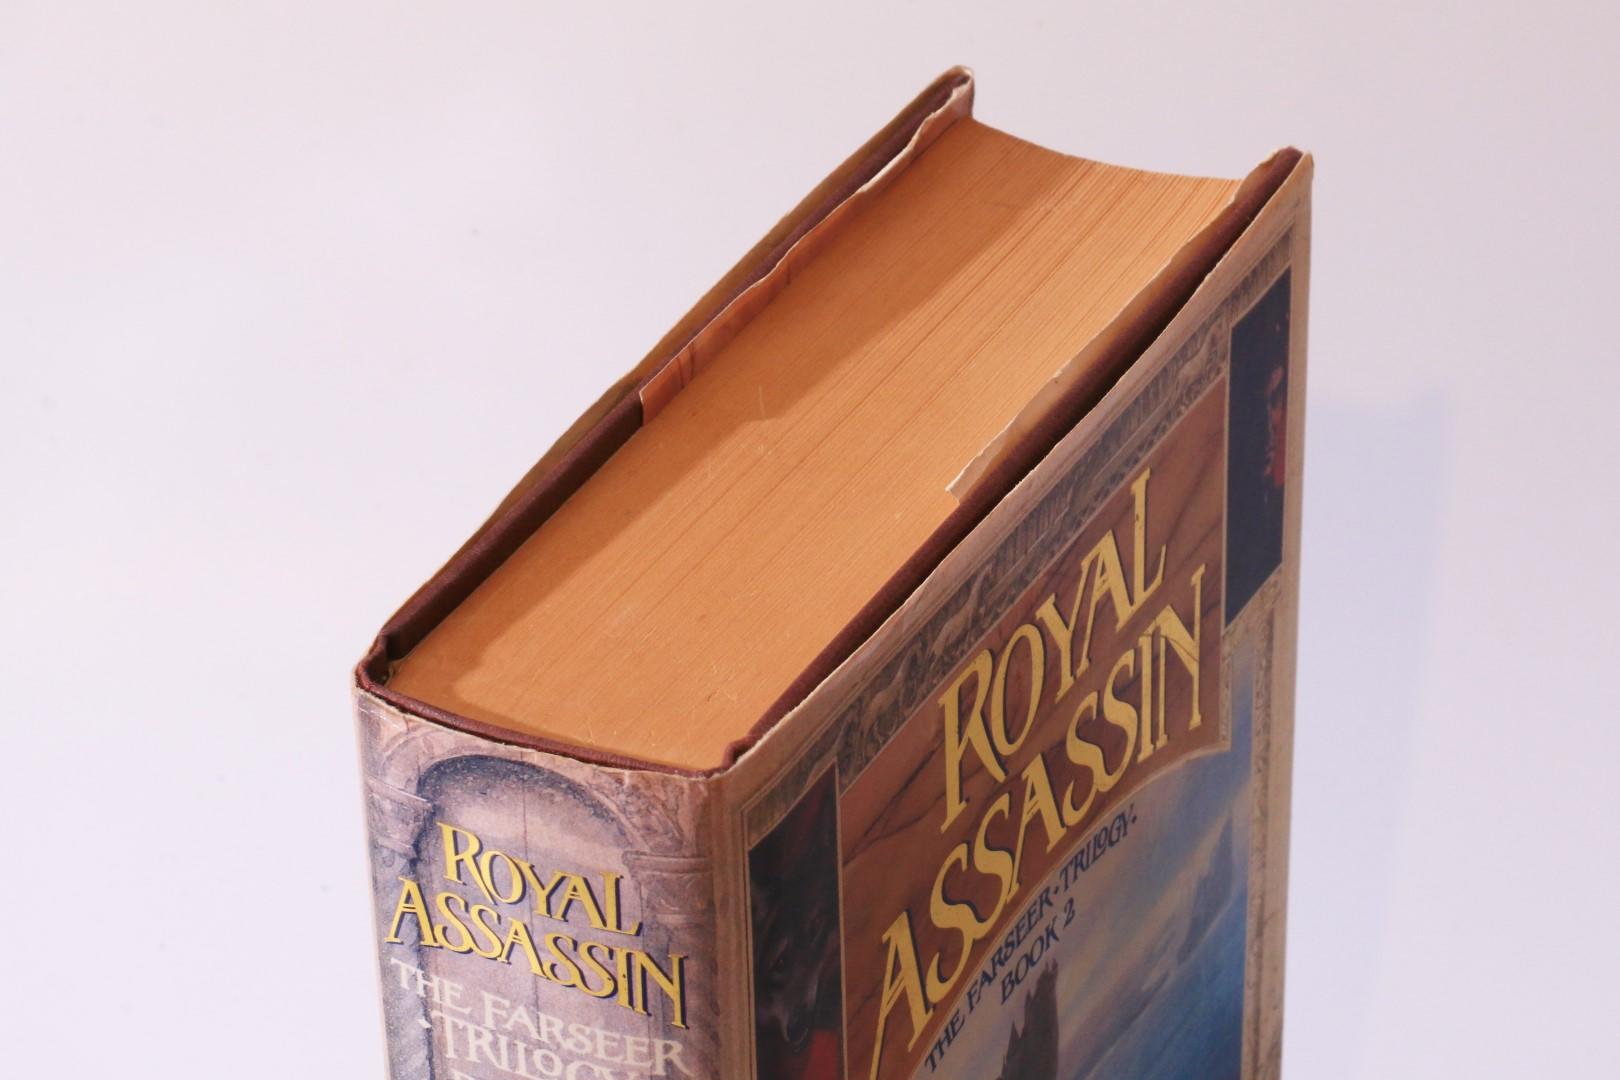 Robin Hobb - Royal Assassin - Voyager, 1996, Signed First Edition.